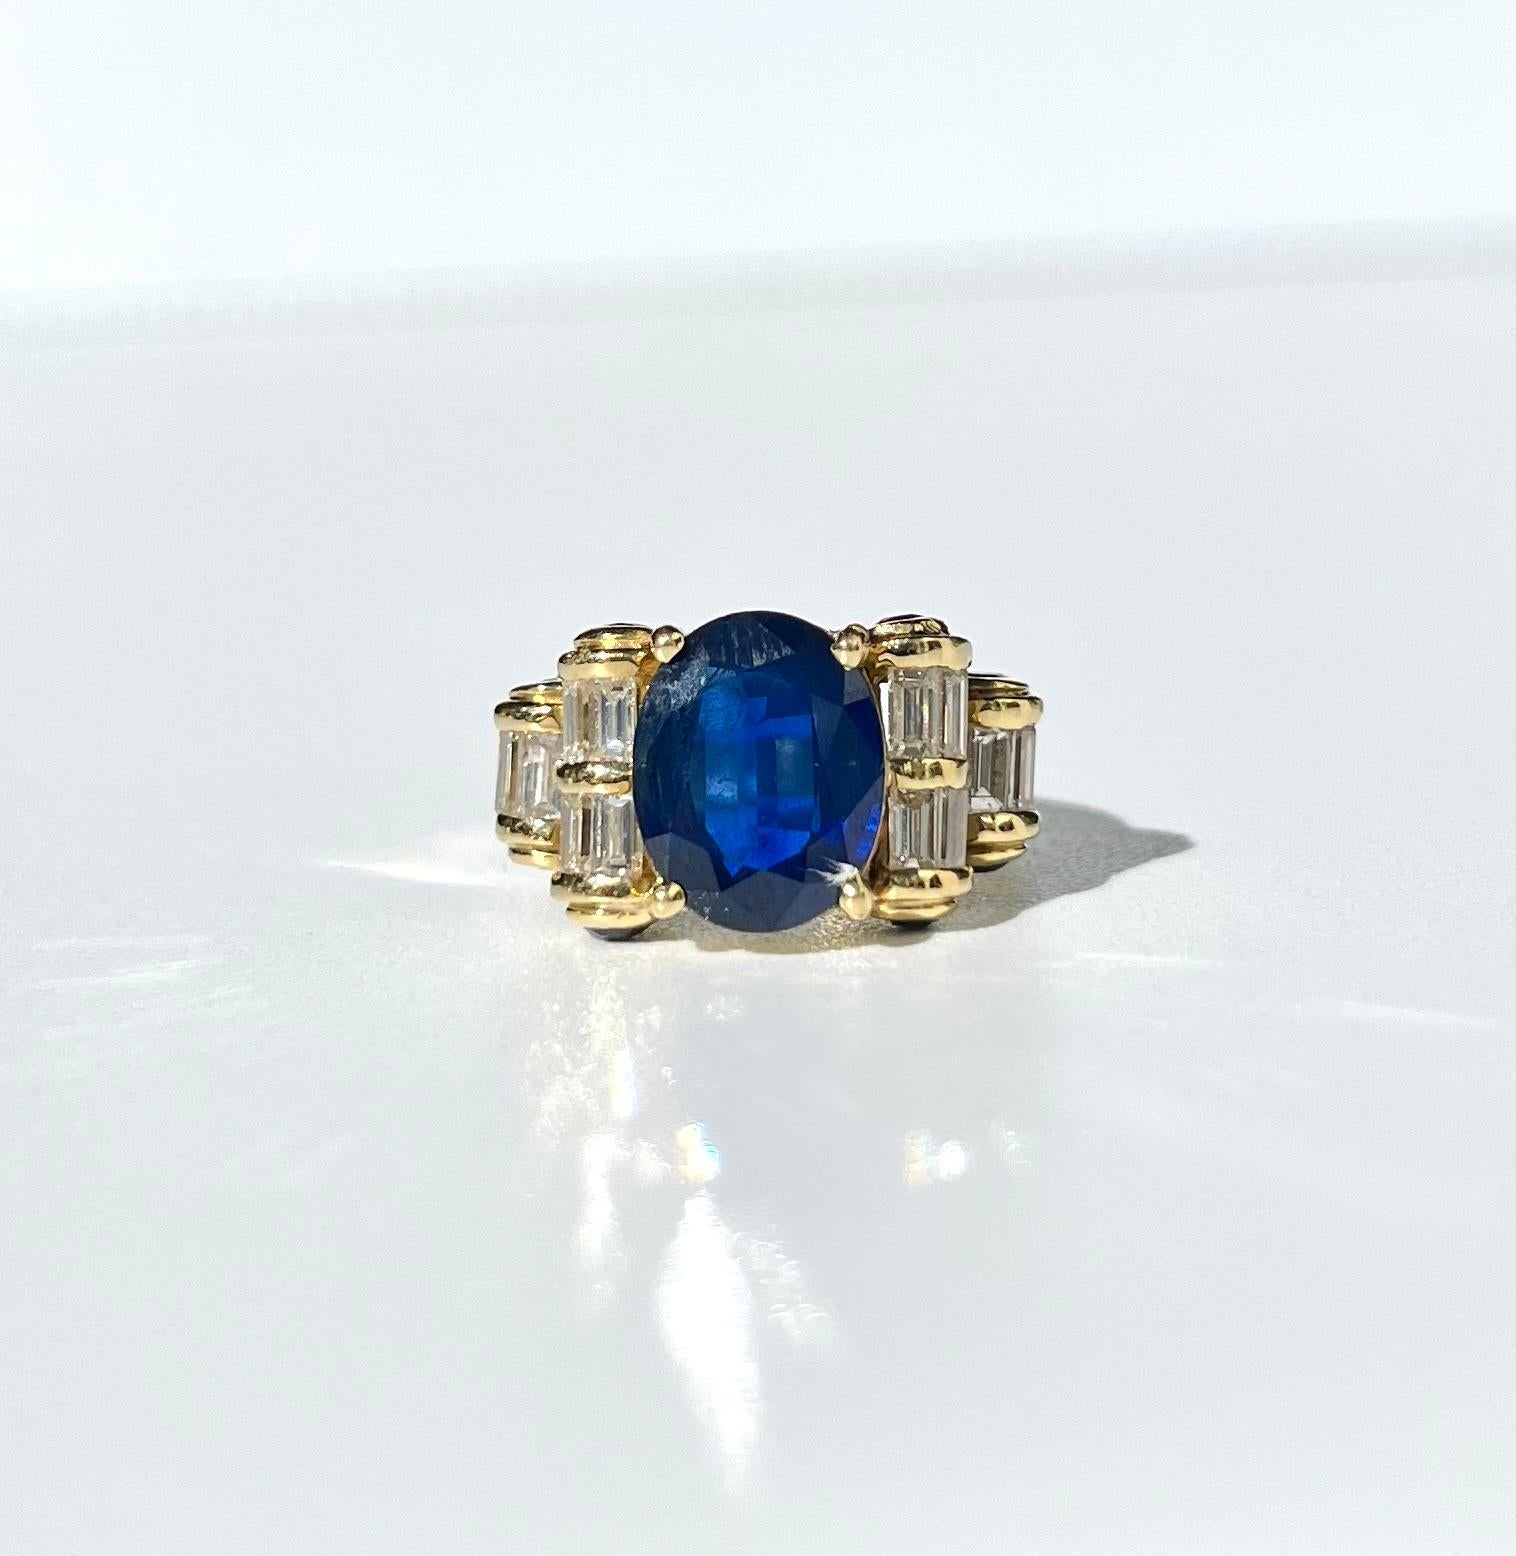 Vintage Blue Sapphire cocktail ring. The center stone Sapphire is whats known as a Chanthaburi Sapphire, because of its humble origins in Chanthaburi, Thailand. A region in Thailand that once used to be rich with Corundum deposits but is now almost